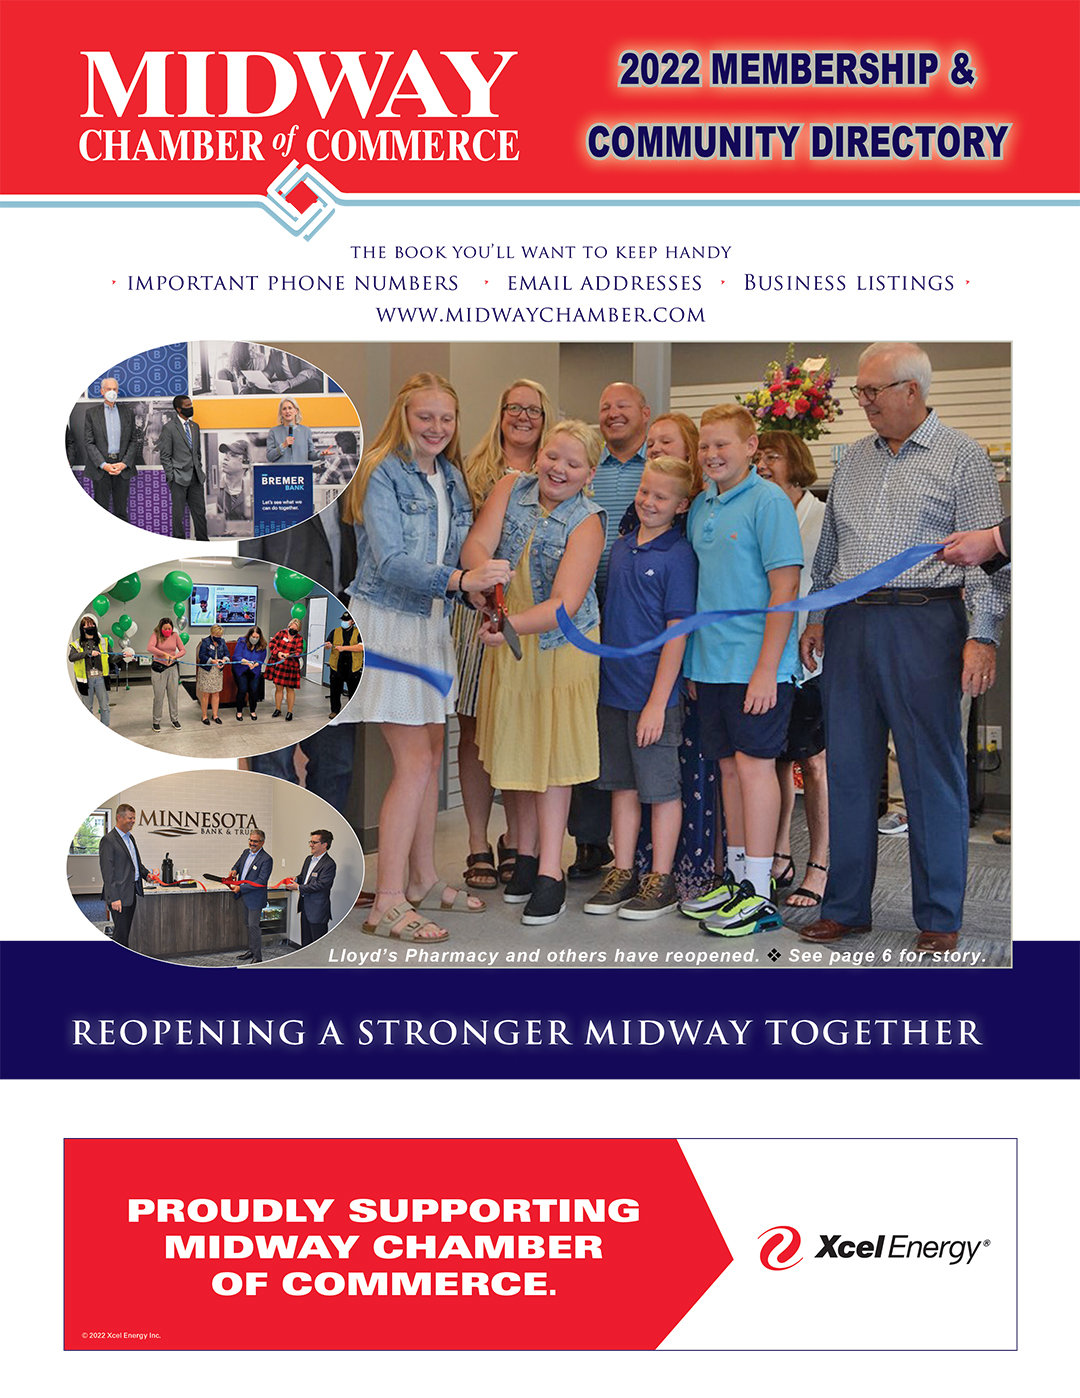 Look for the 2022 Midway Chamber Directory with your paper this month, at local businesses, and at www.MonitorSaintPaul.com.